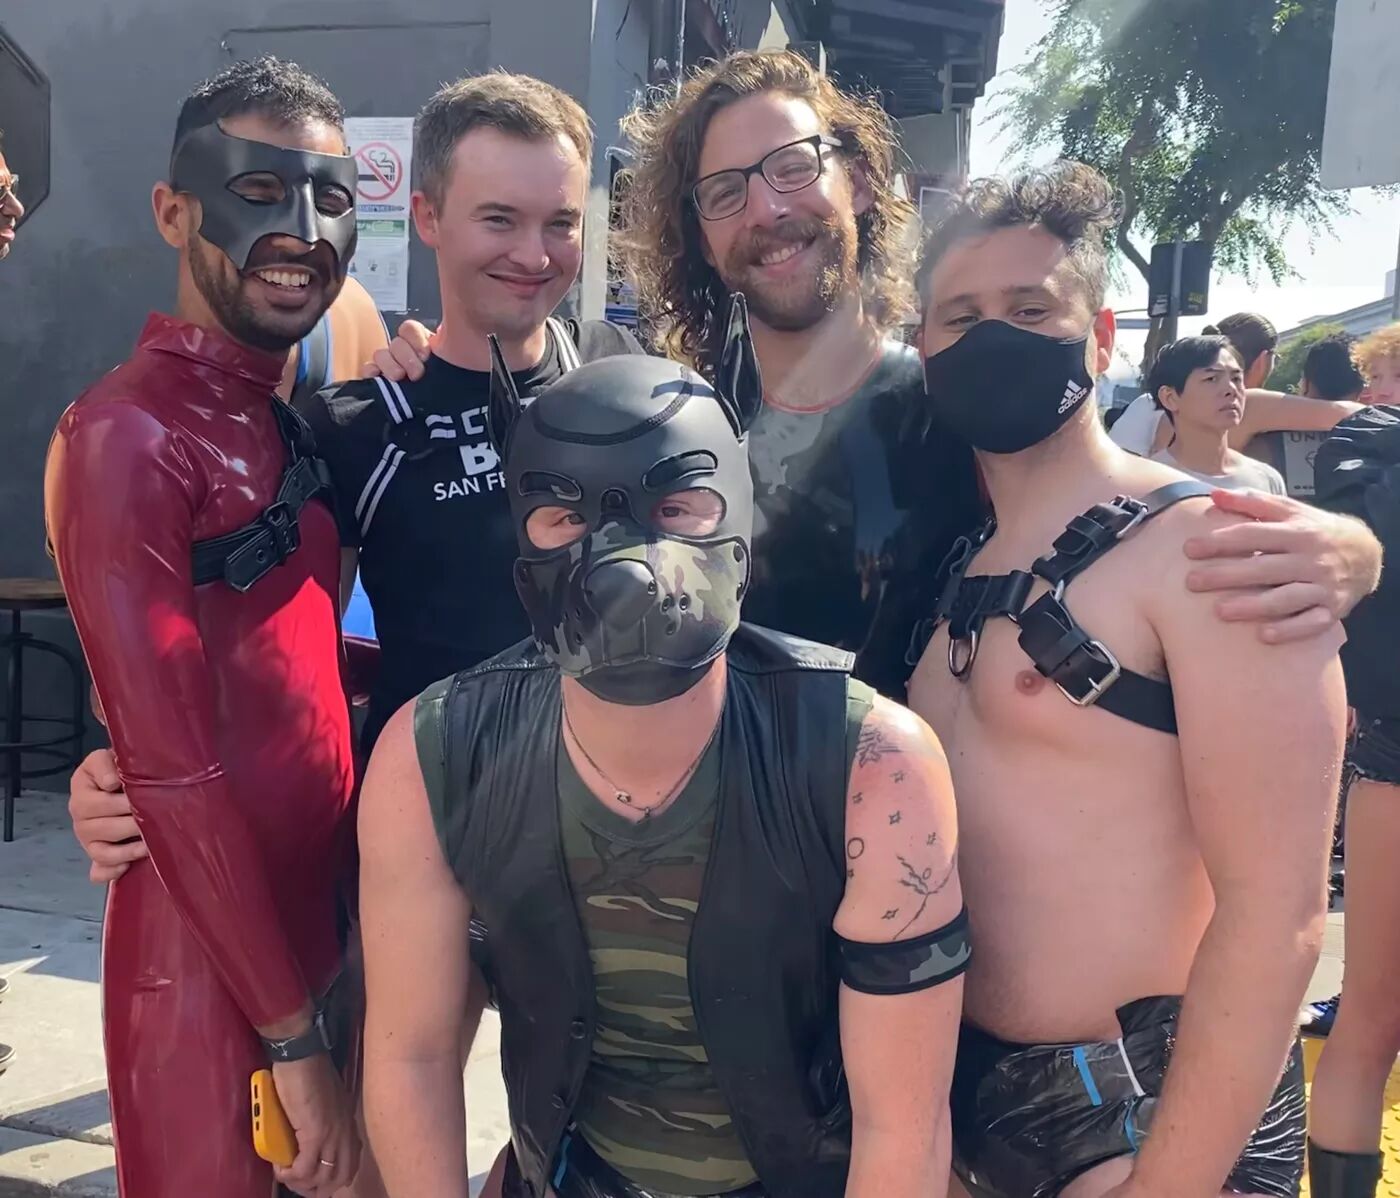 A group of men adorned in various kink and fetish attire stand together smiling at the camera